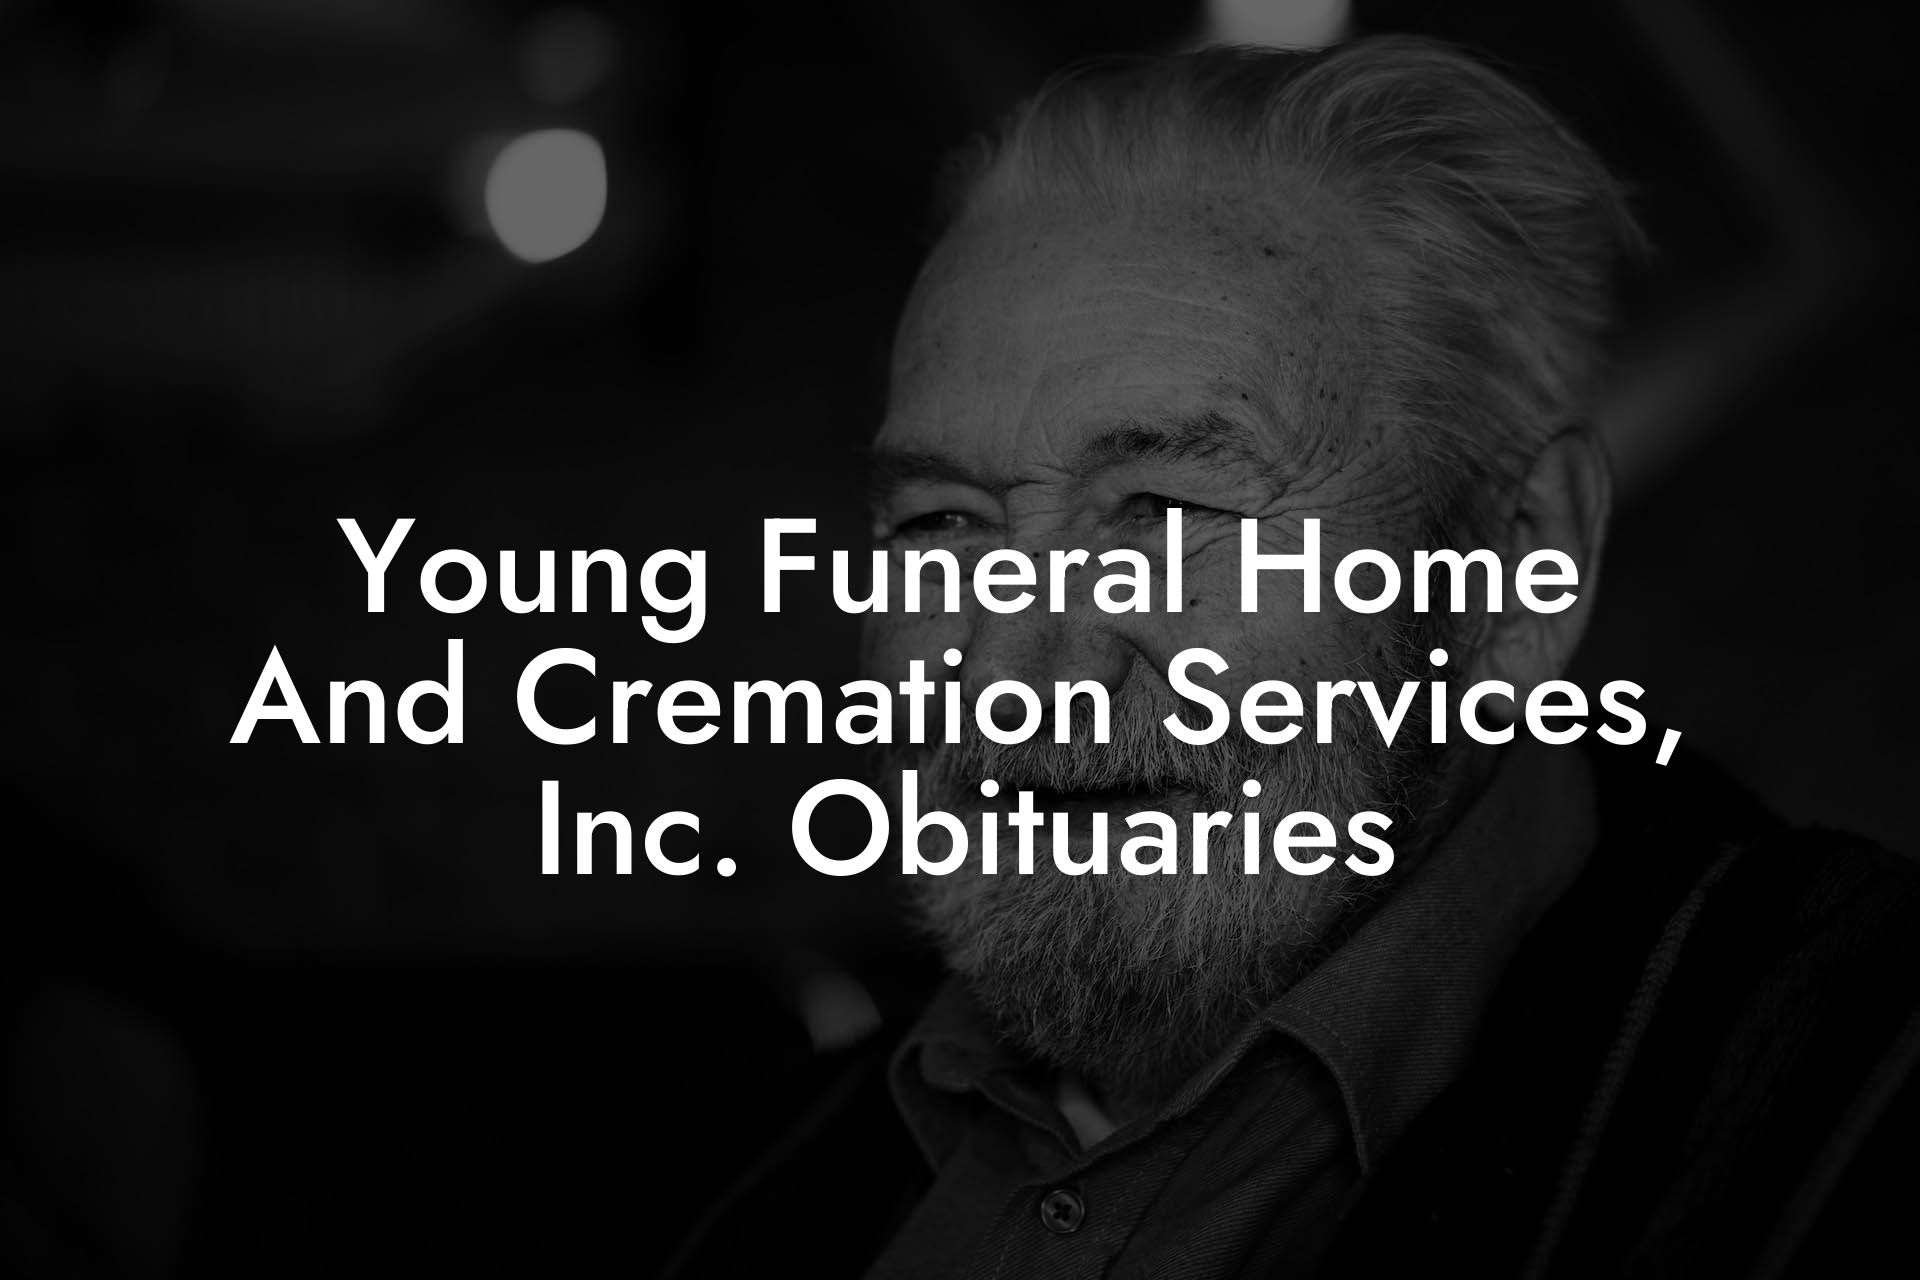 Young Funeral Home And Cremation Services, Inc. Obituaries